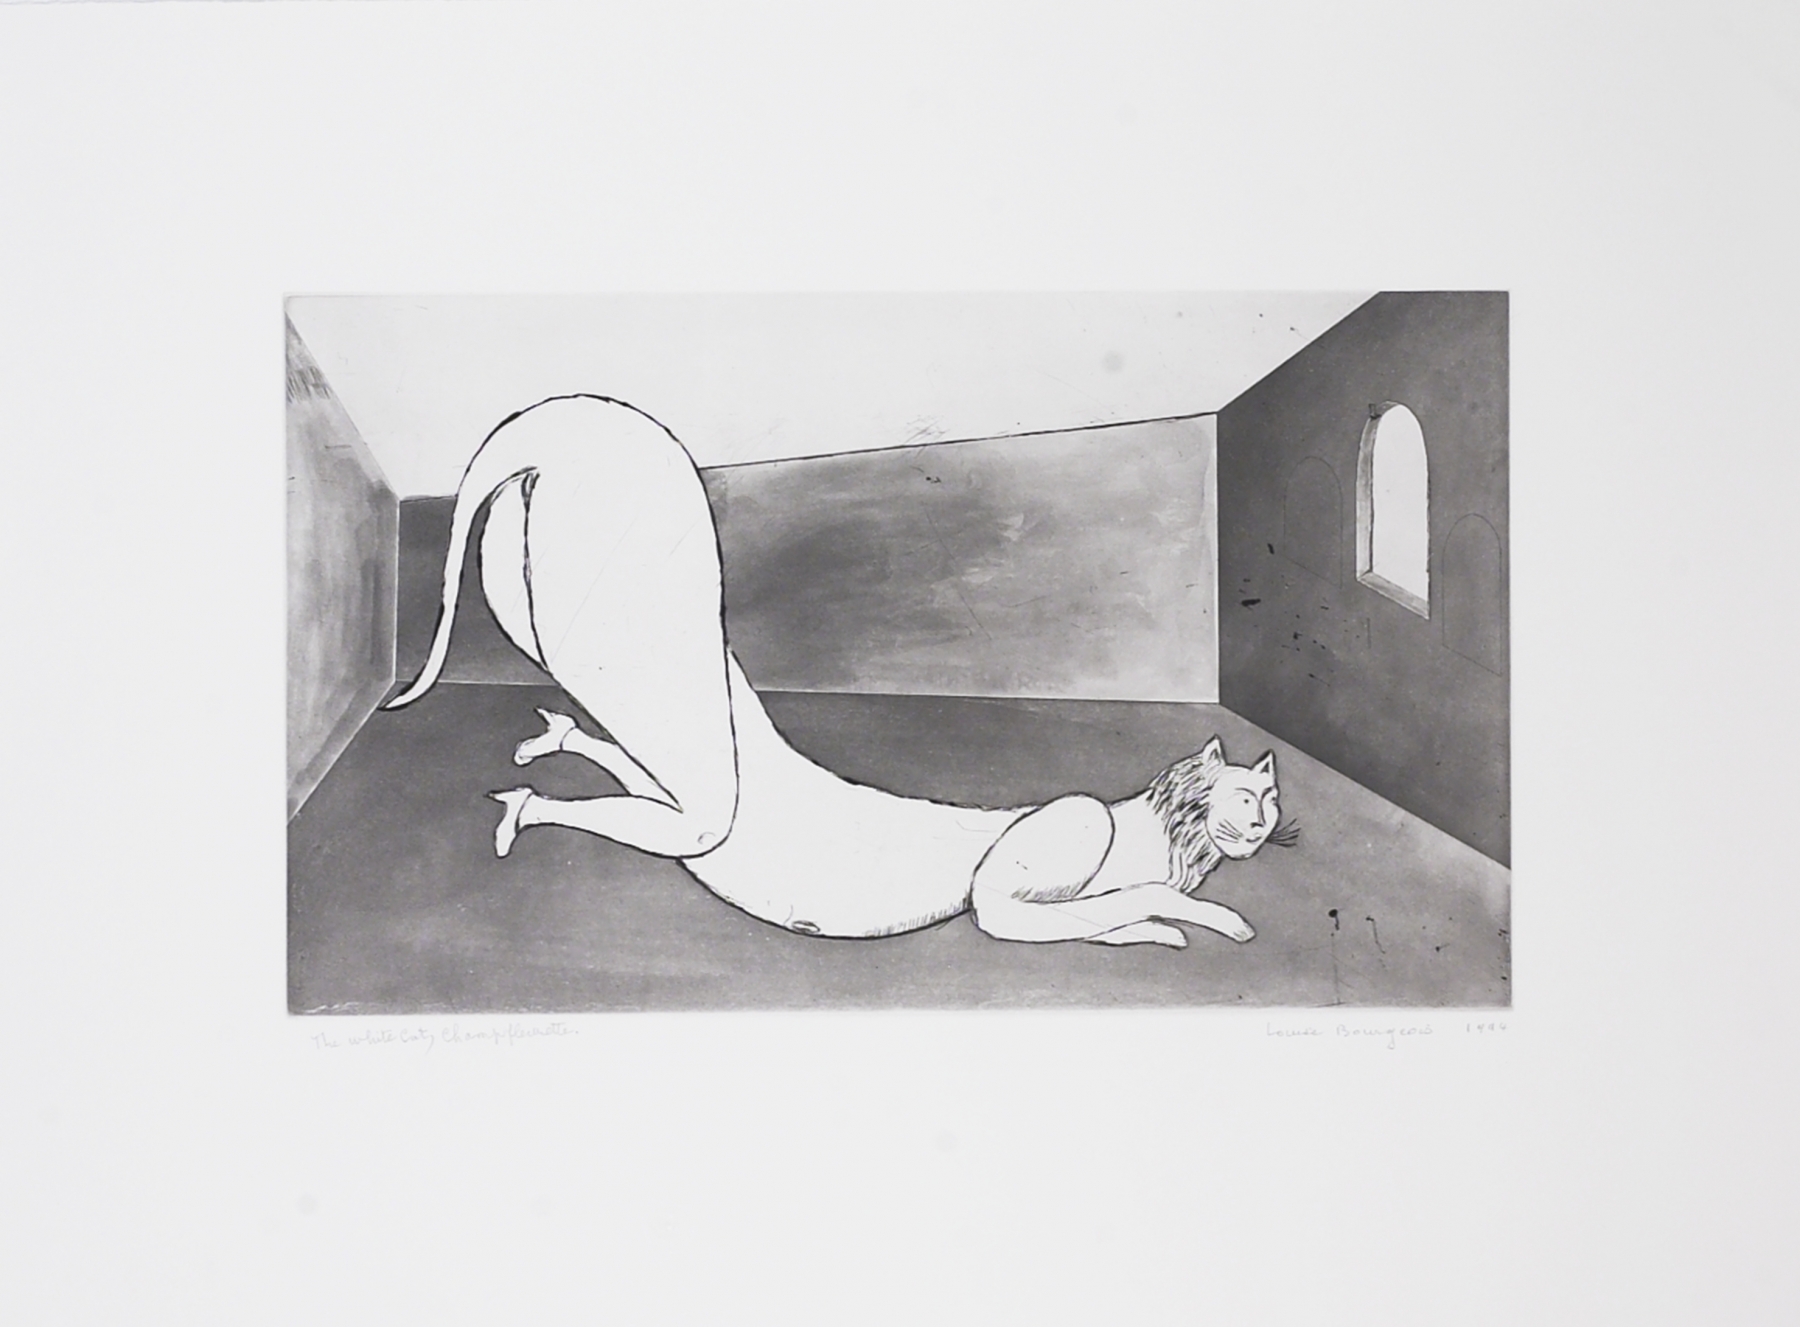 Champfleurette, the White Cat, 1994
Drypoint, etching, and aquatint
18 1/2 x 25 inches (46.99 x 63.5 cm)
Edition of 22 + proofs

Inquire
&amp;nbsp;